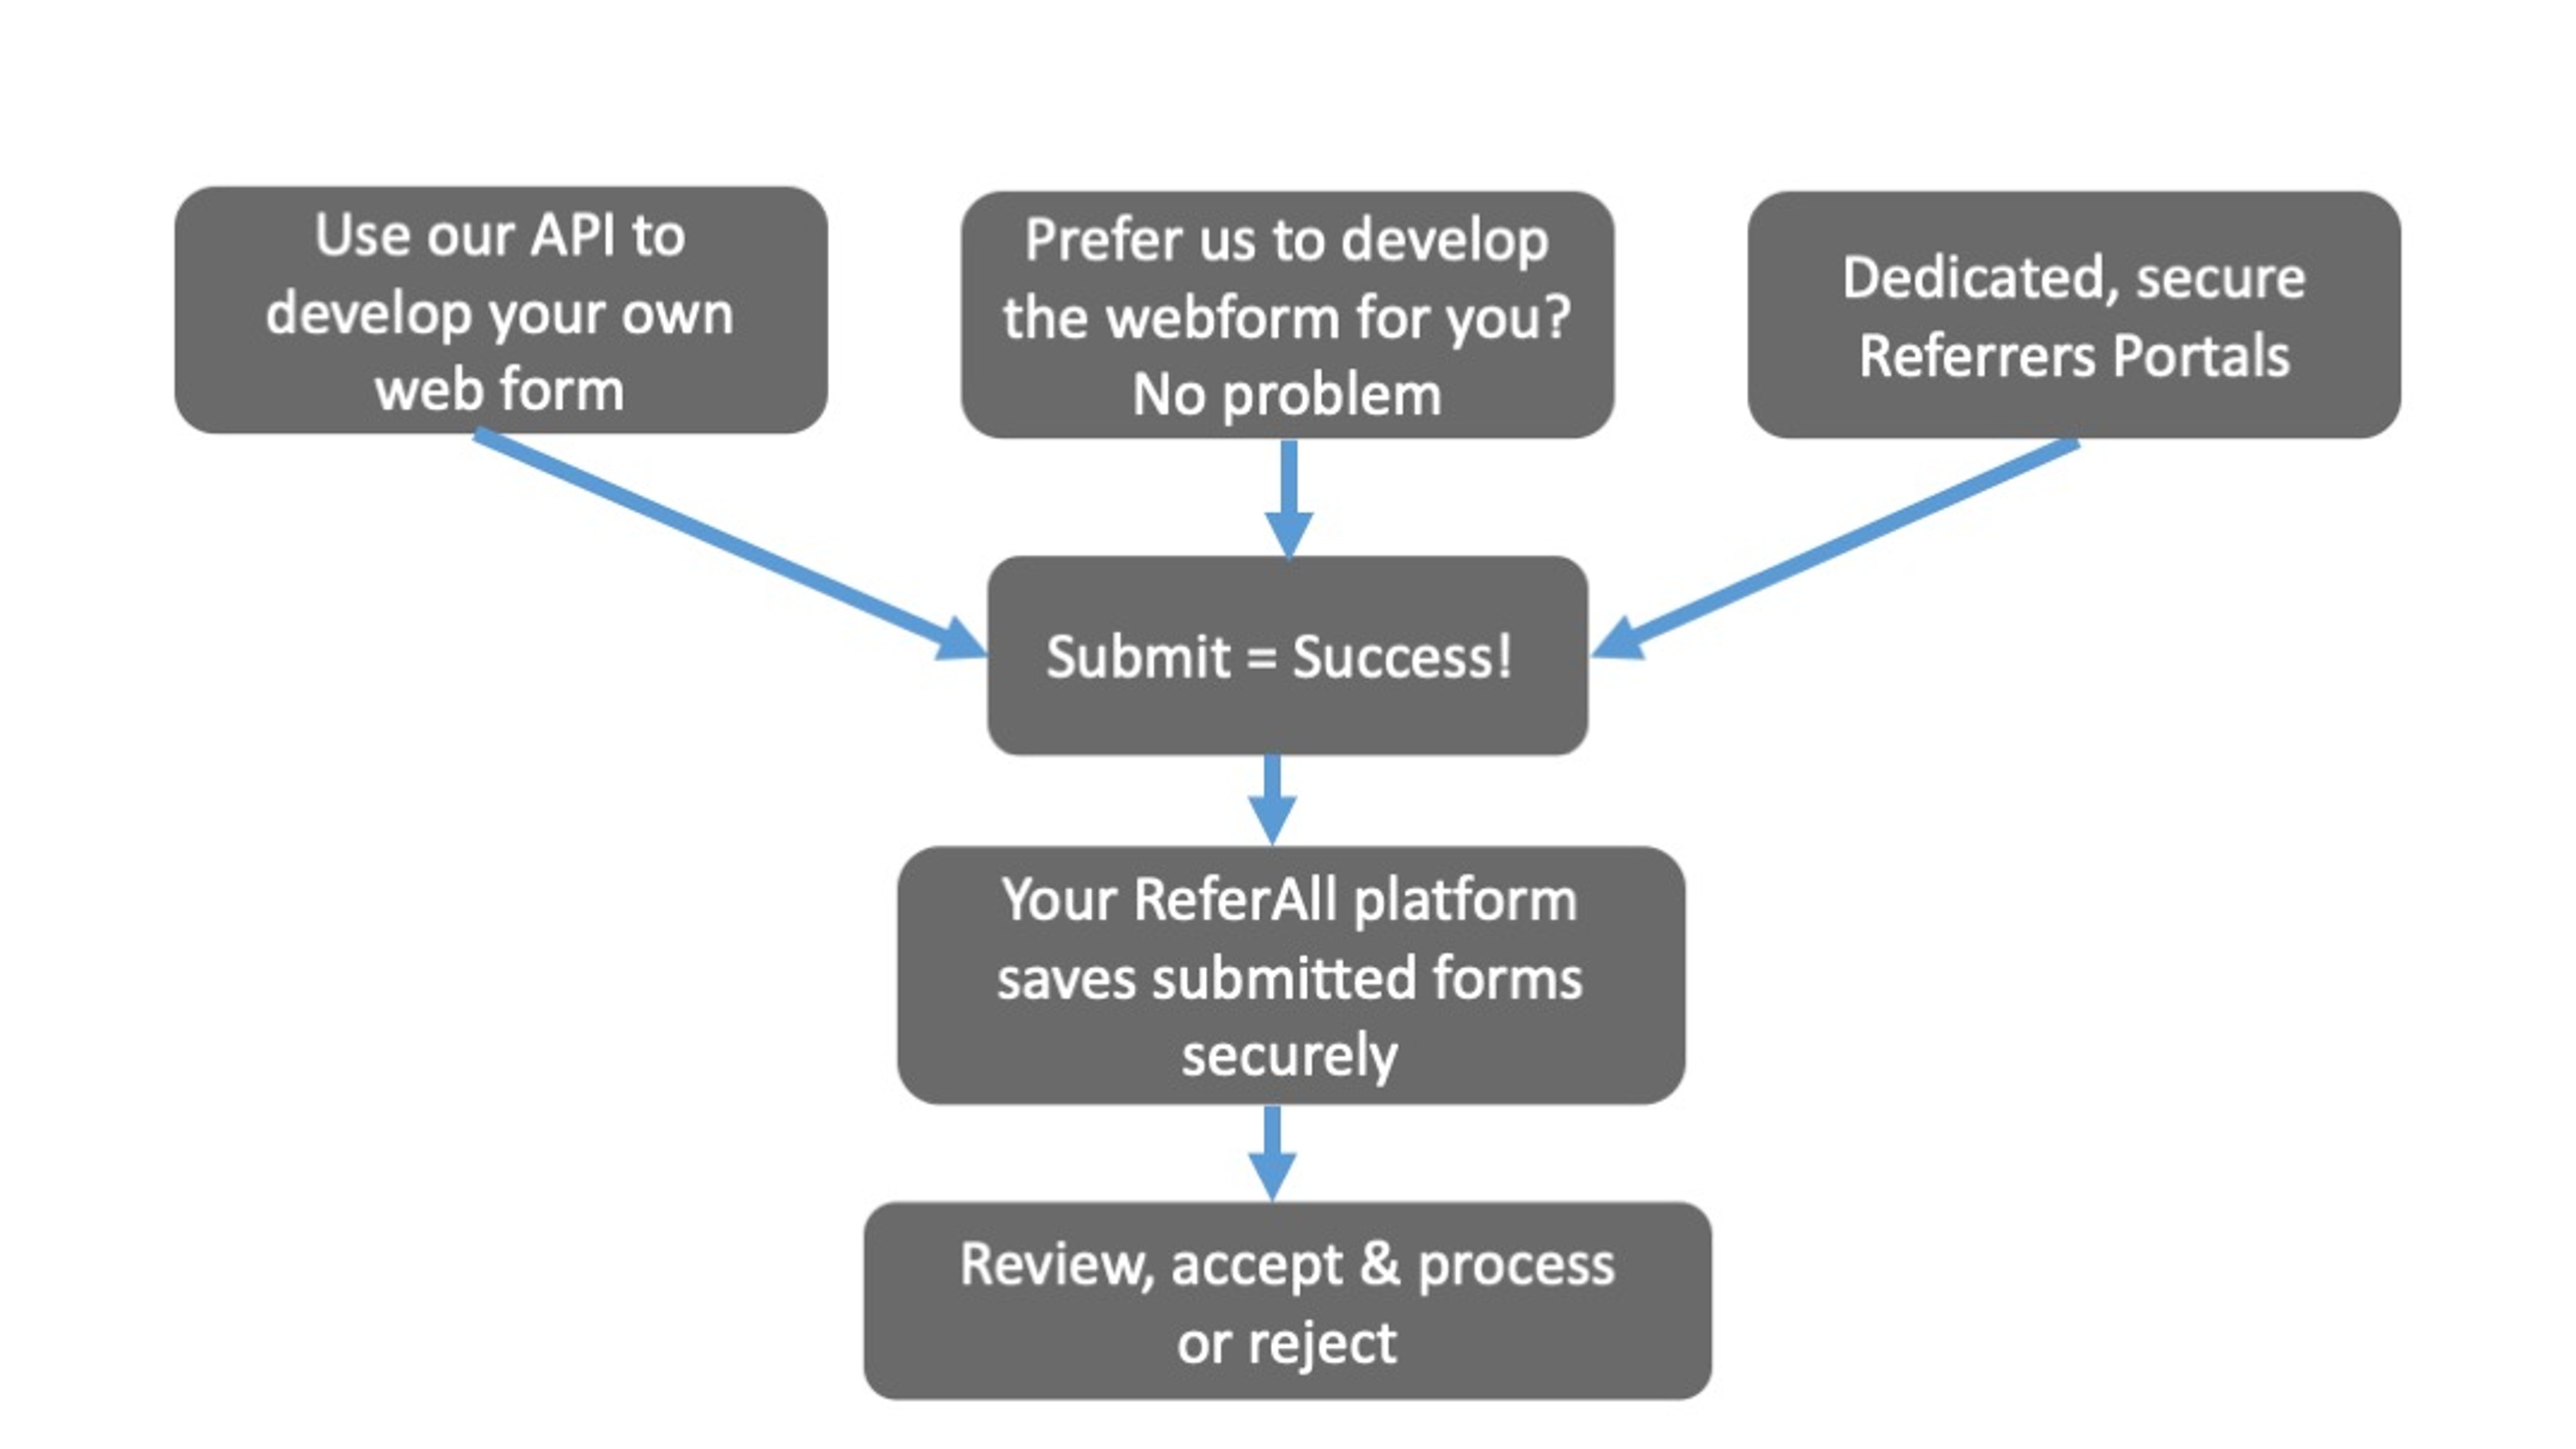 ReferAll's Pathway Solutions provides a choice of referral options to suit your services